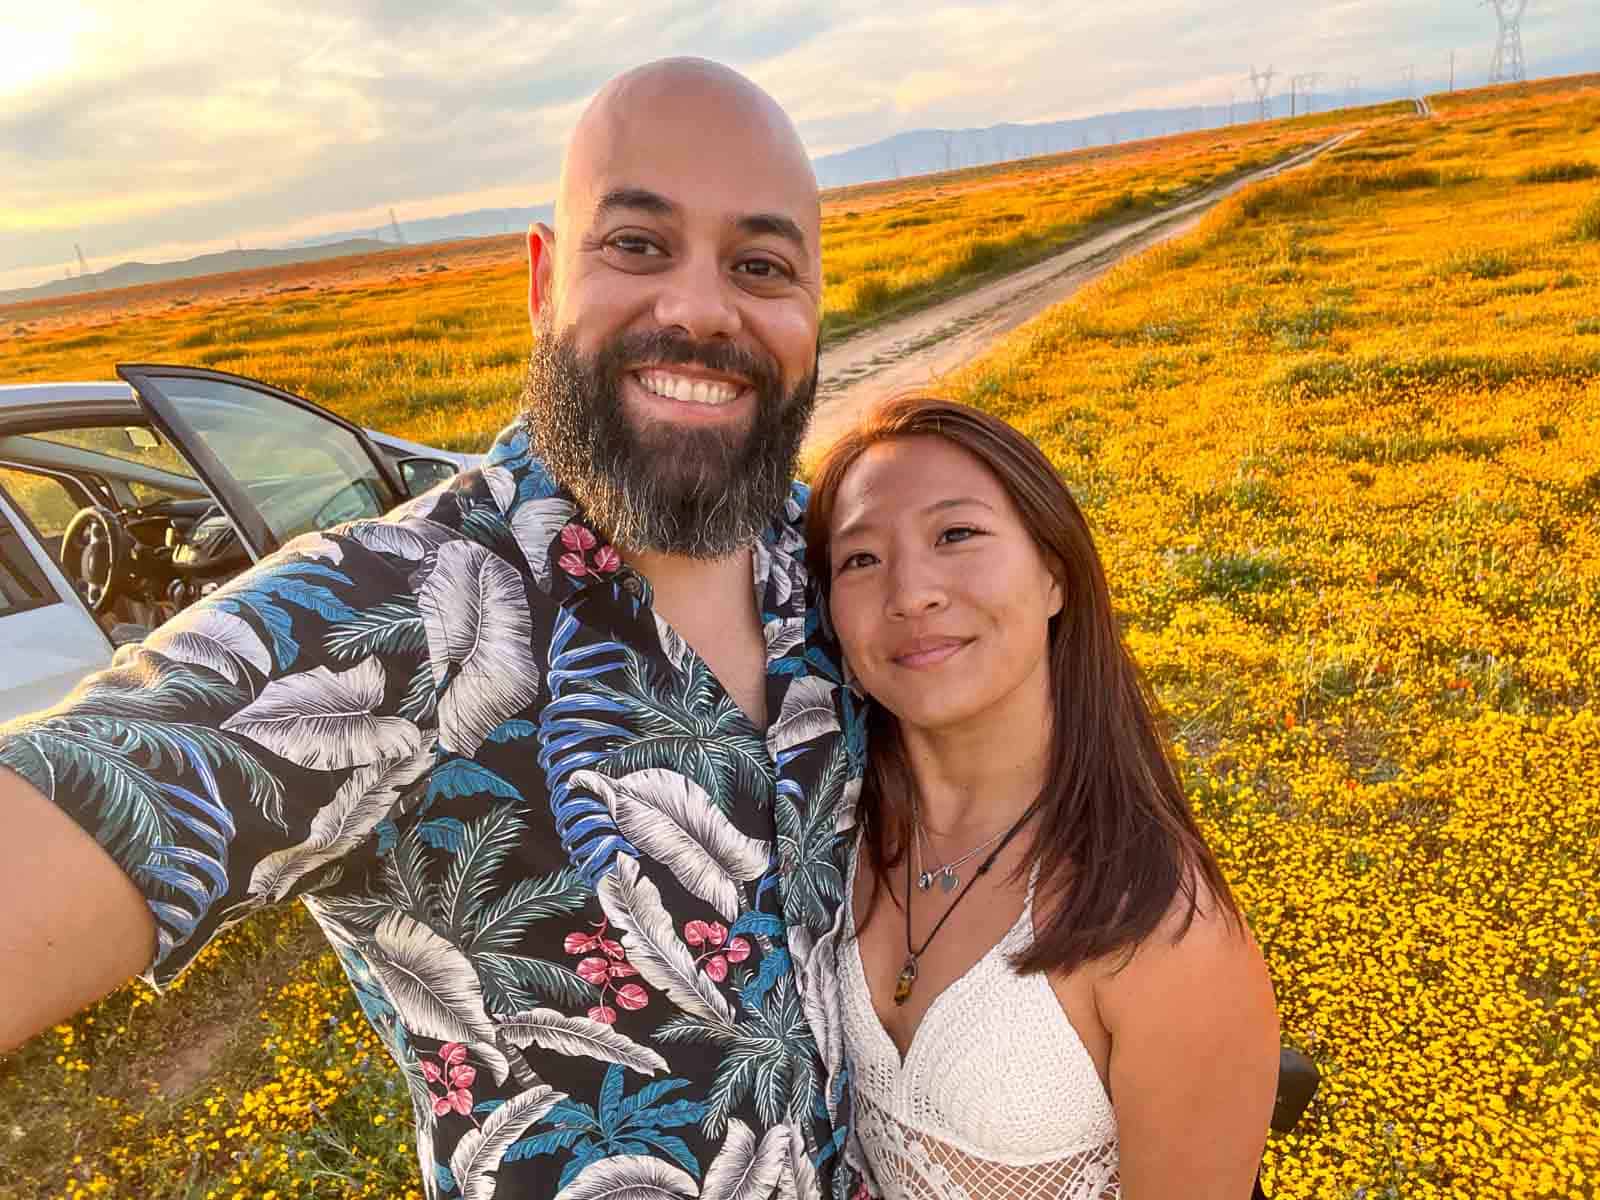 cat xu and brazilian friend smiling in front of the california poppy fields